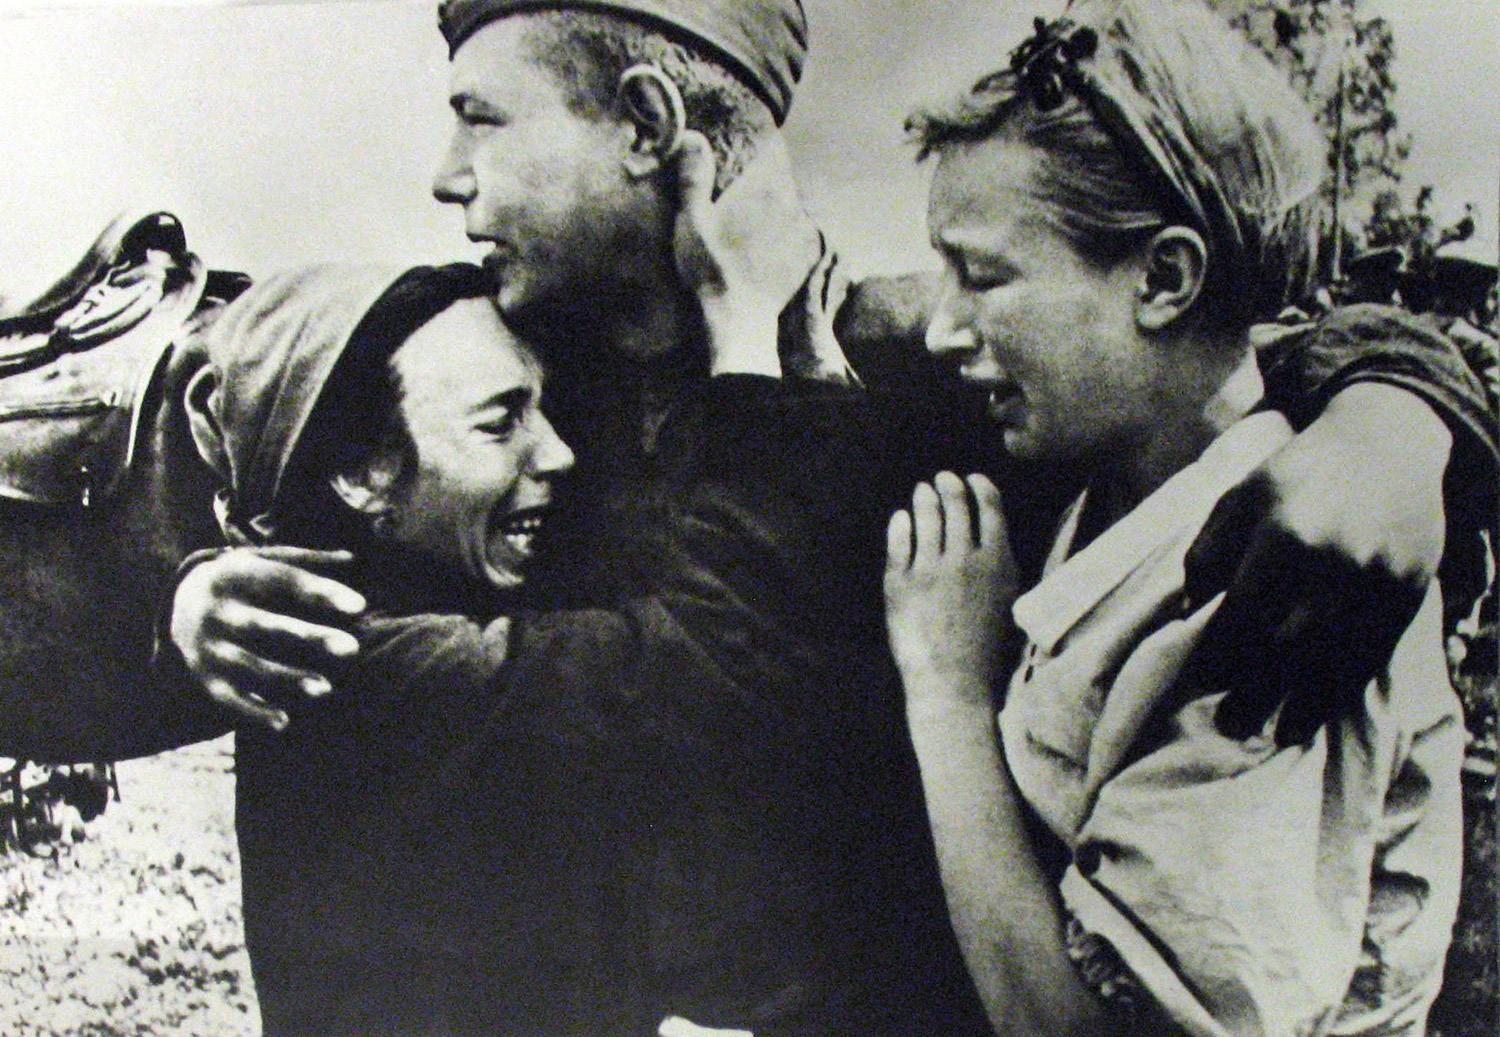 Image: In a Liberated Village, Byelorussia, 1944